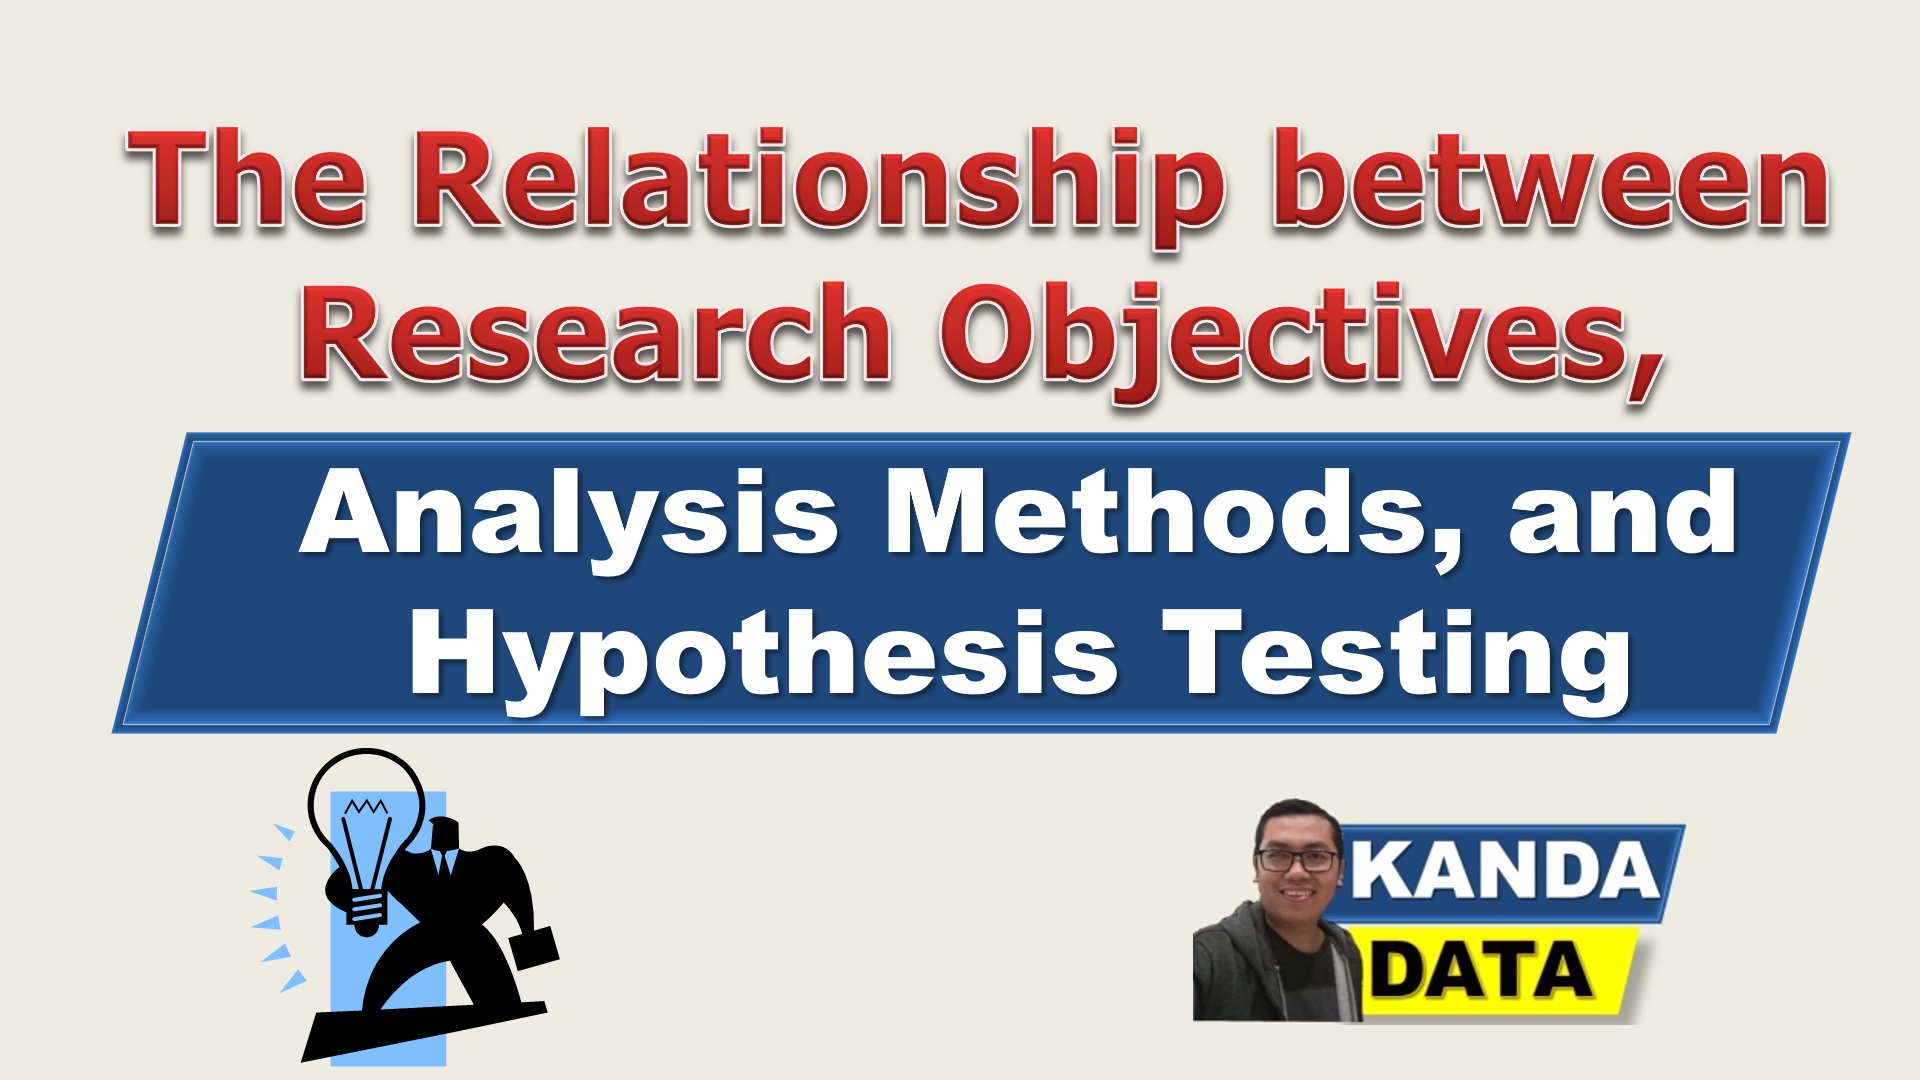 research objectives have direct relationship with the